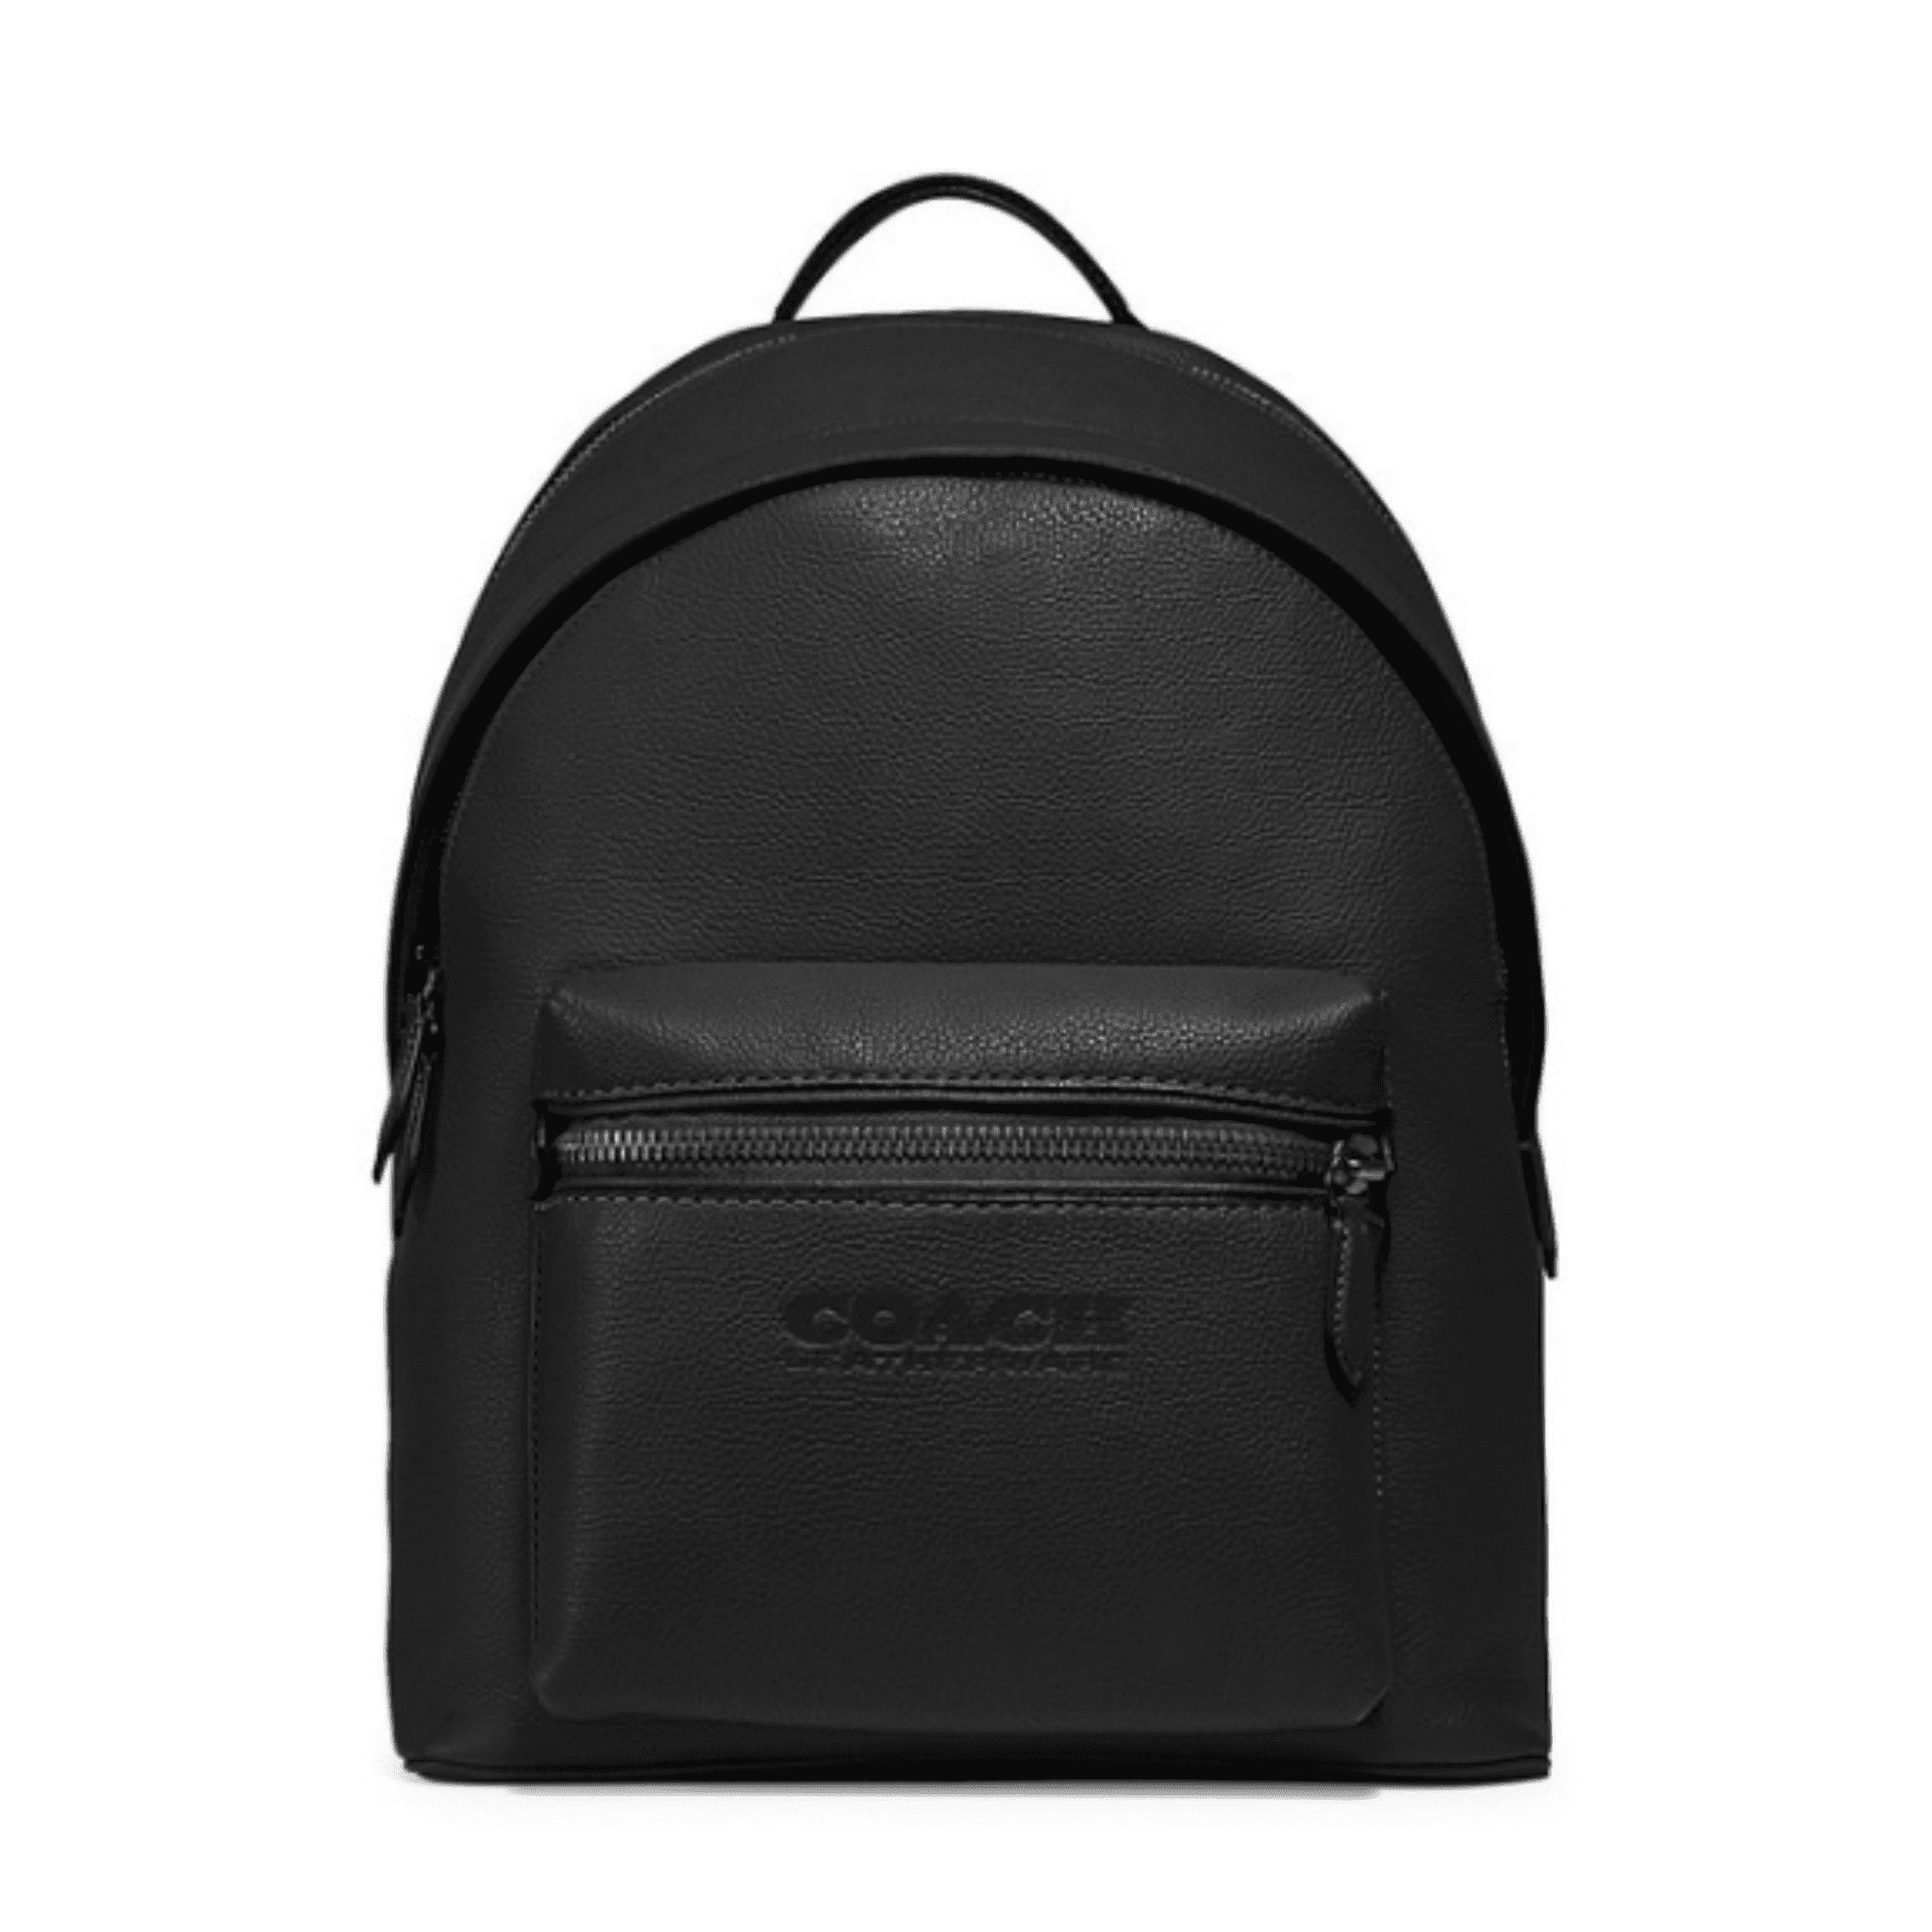 Black Coach Backback with top handle.